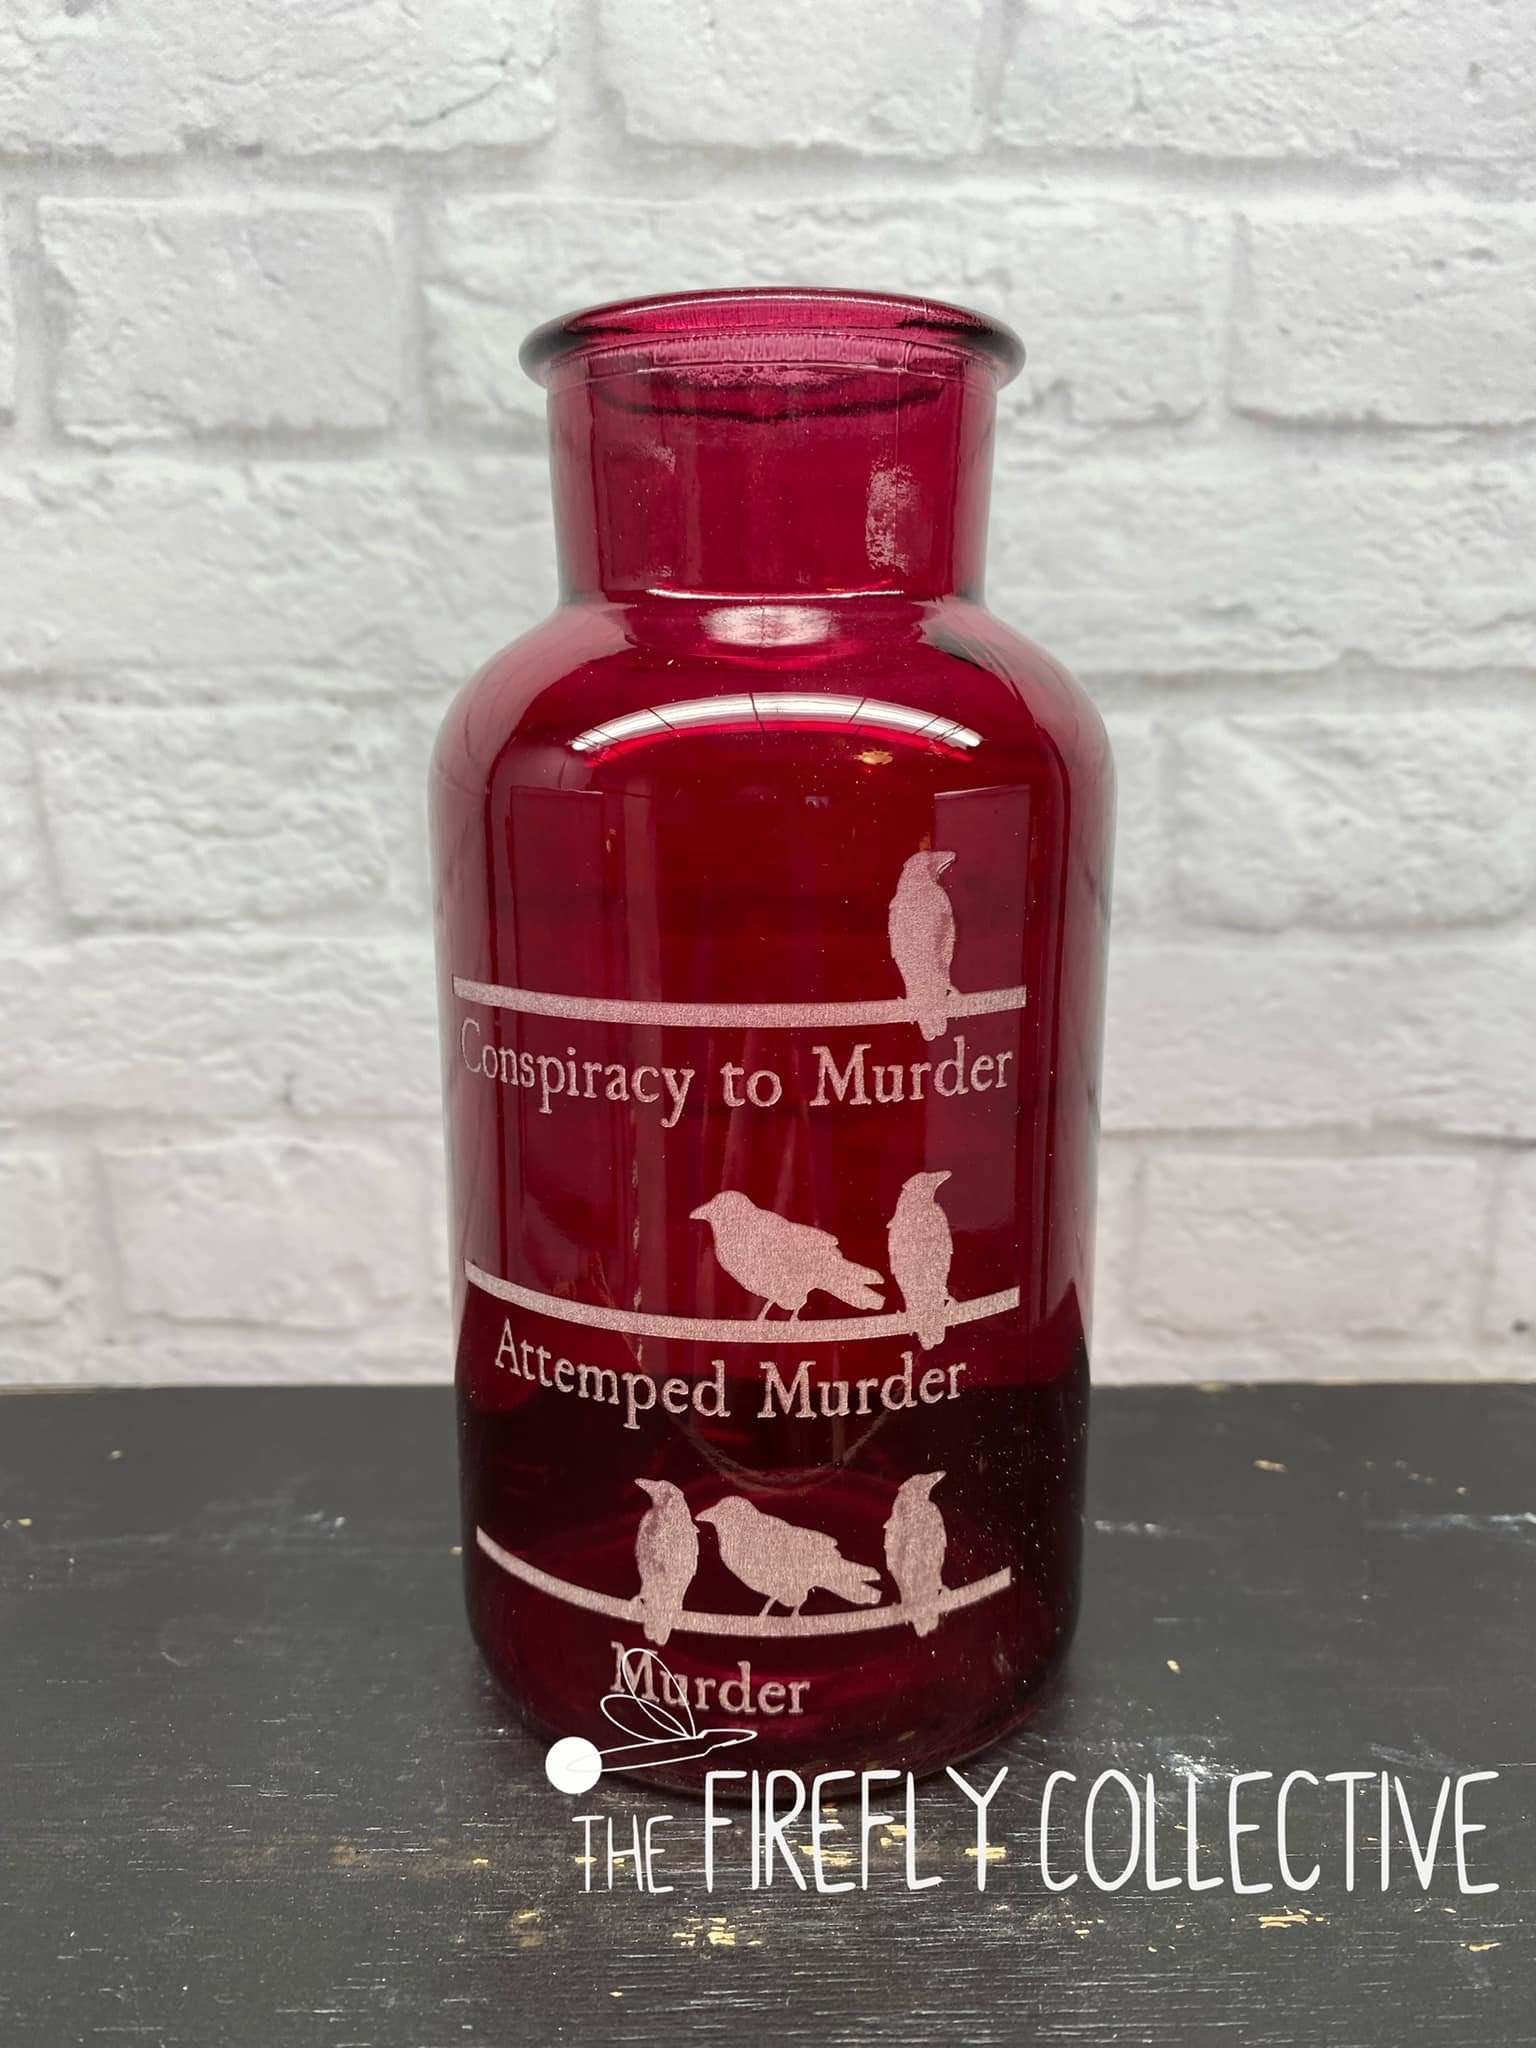 Murder of Crows (Conspiracy to Murder, Attempted Murder) Laser Engraved Bottle - Bibliophile, Halloween, Humorous